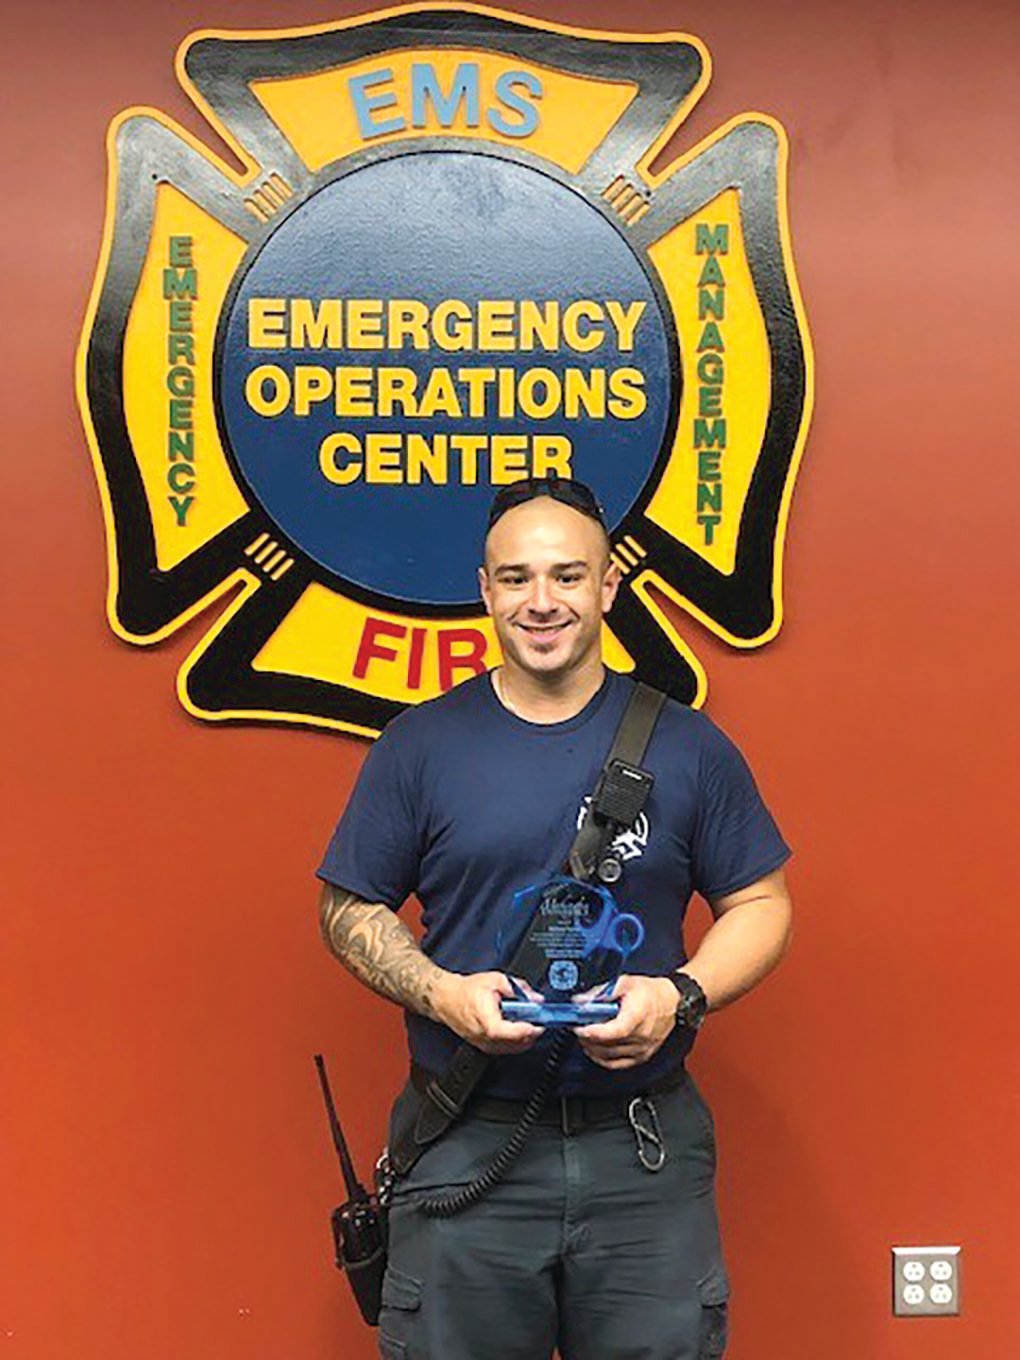 Glades County Public Safety congratulates Michael Torres on being named Glades County Public Safety Employee of the Year for 2021.